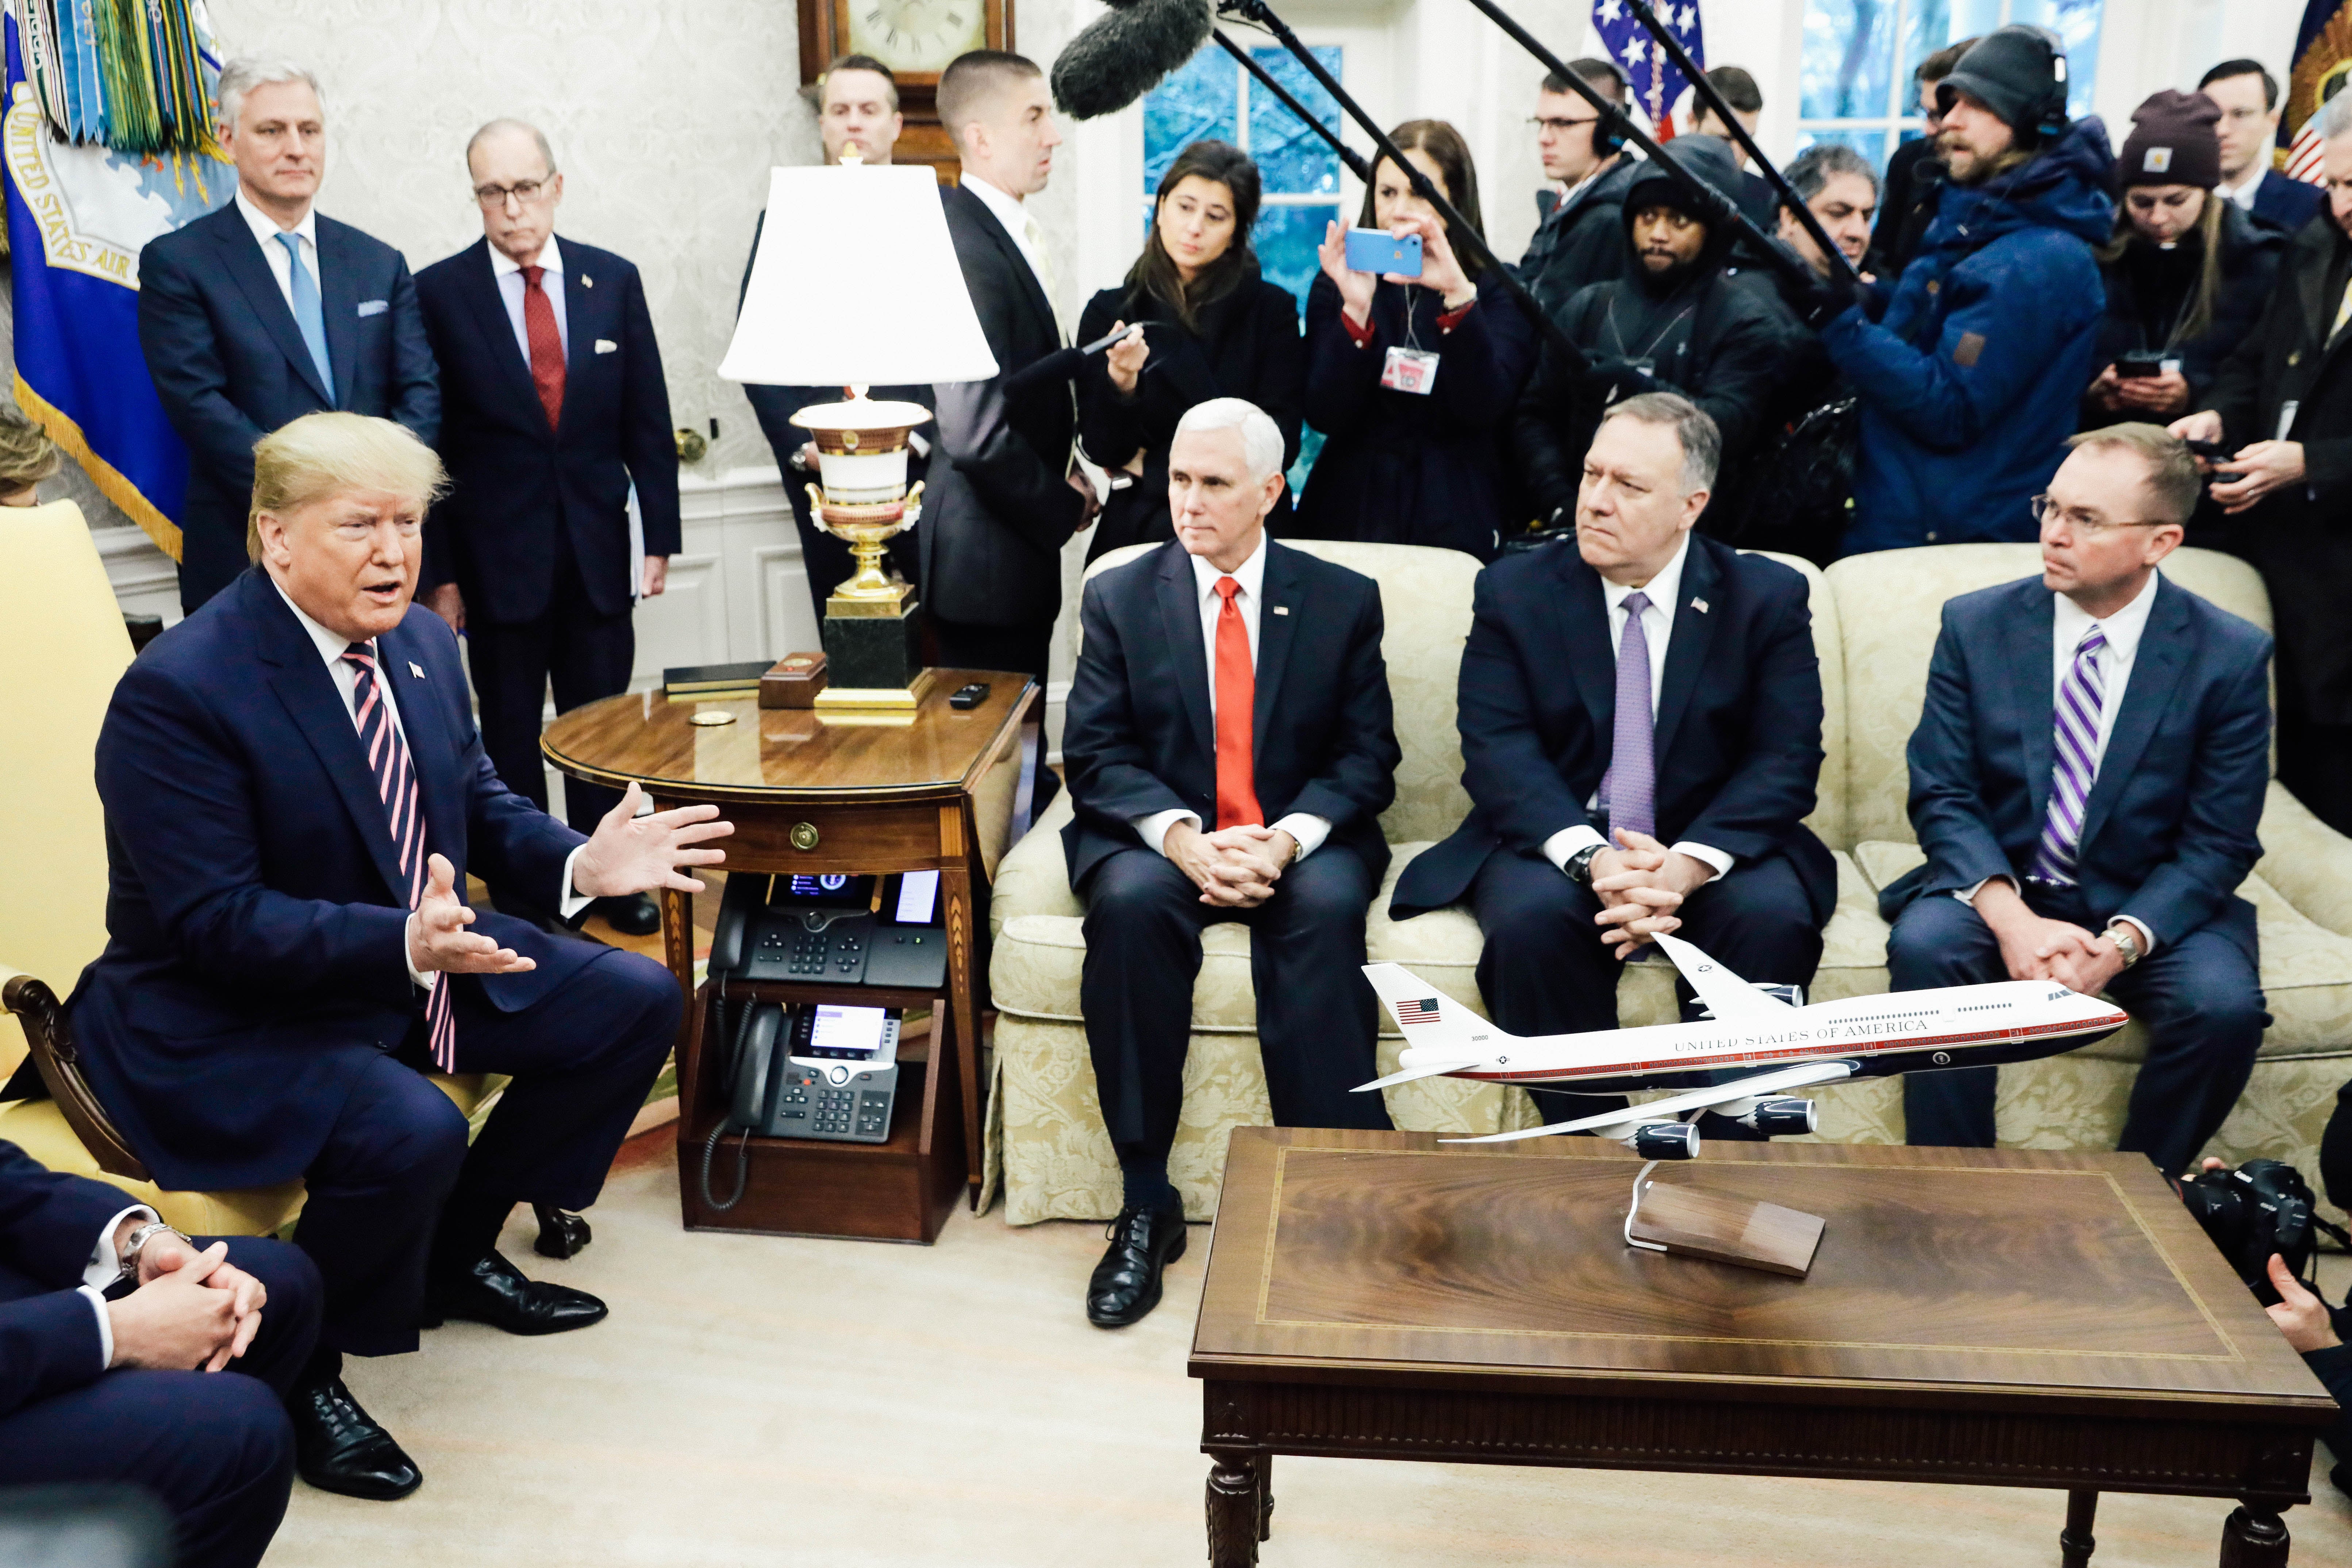 On the left, Donald Trump sits on a chair and speaks, with Robert O'Brien and Larry Kudlow standing behind. Mike Pence, Mike Pompeo, and Mick Mulvaney sit on a couch near Trump and look at him as reporters hold up microphones behind them.